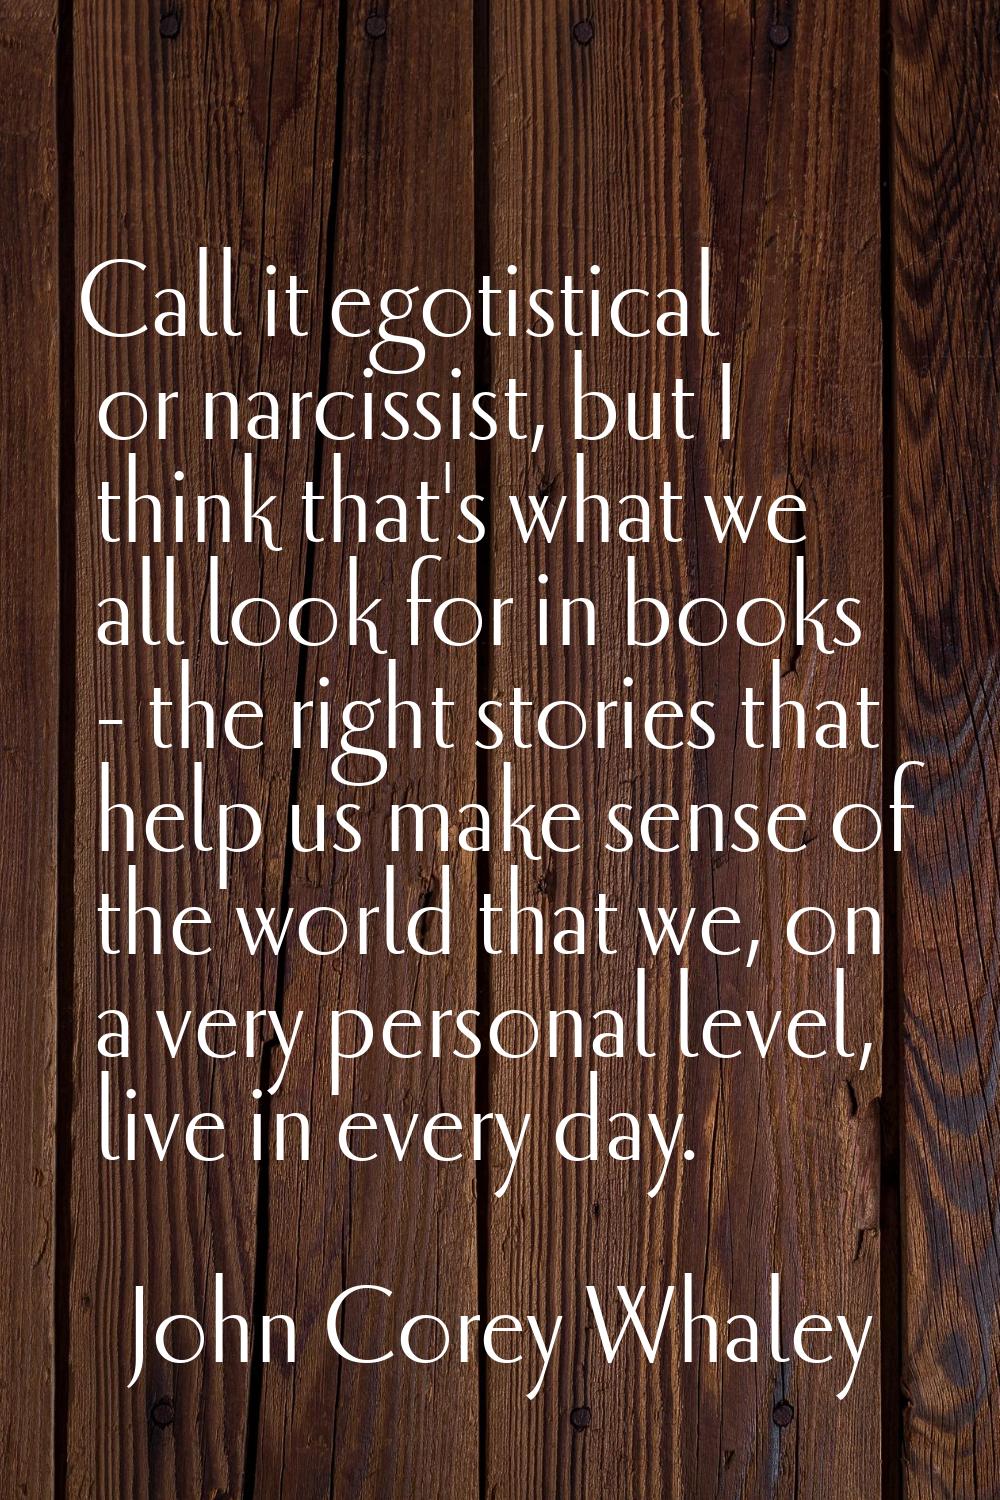 Call it egotistical or narcissist, but I think that's what we all look for in books - the right sto